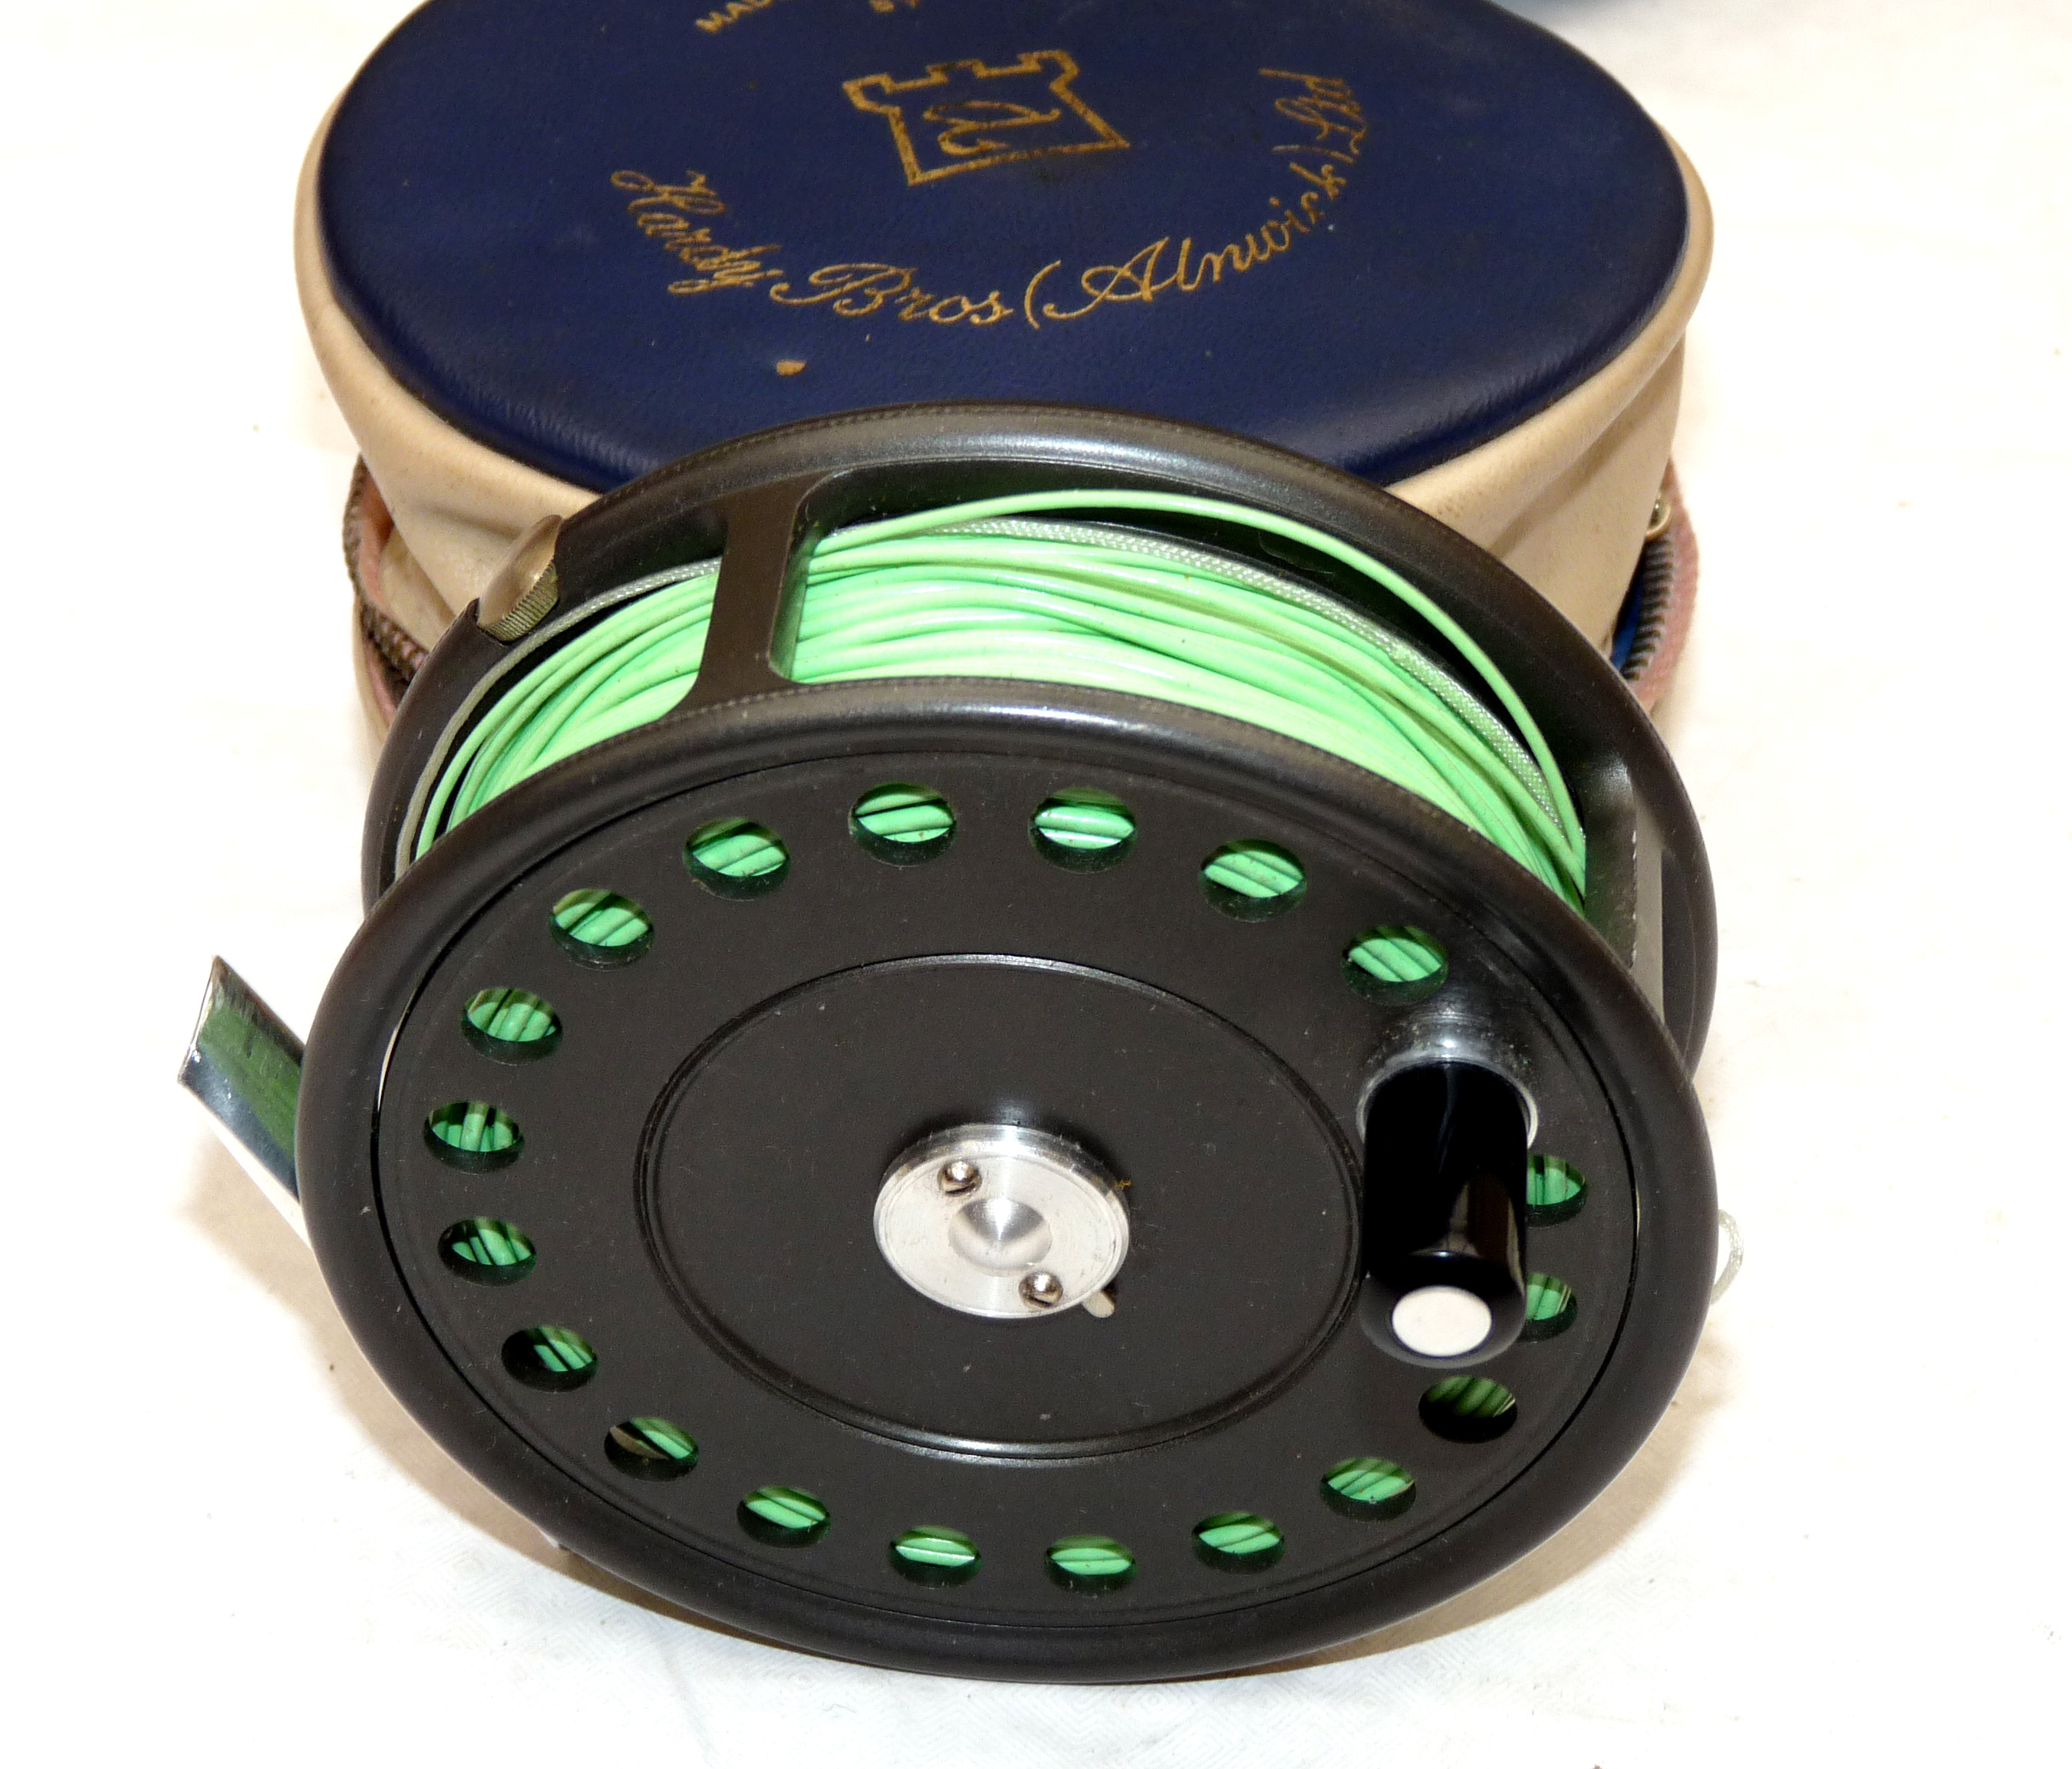 REEL: Hardy “The St John Mk2” alloy trout fly reel in as new condition, 2 screw latch, rim tension